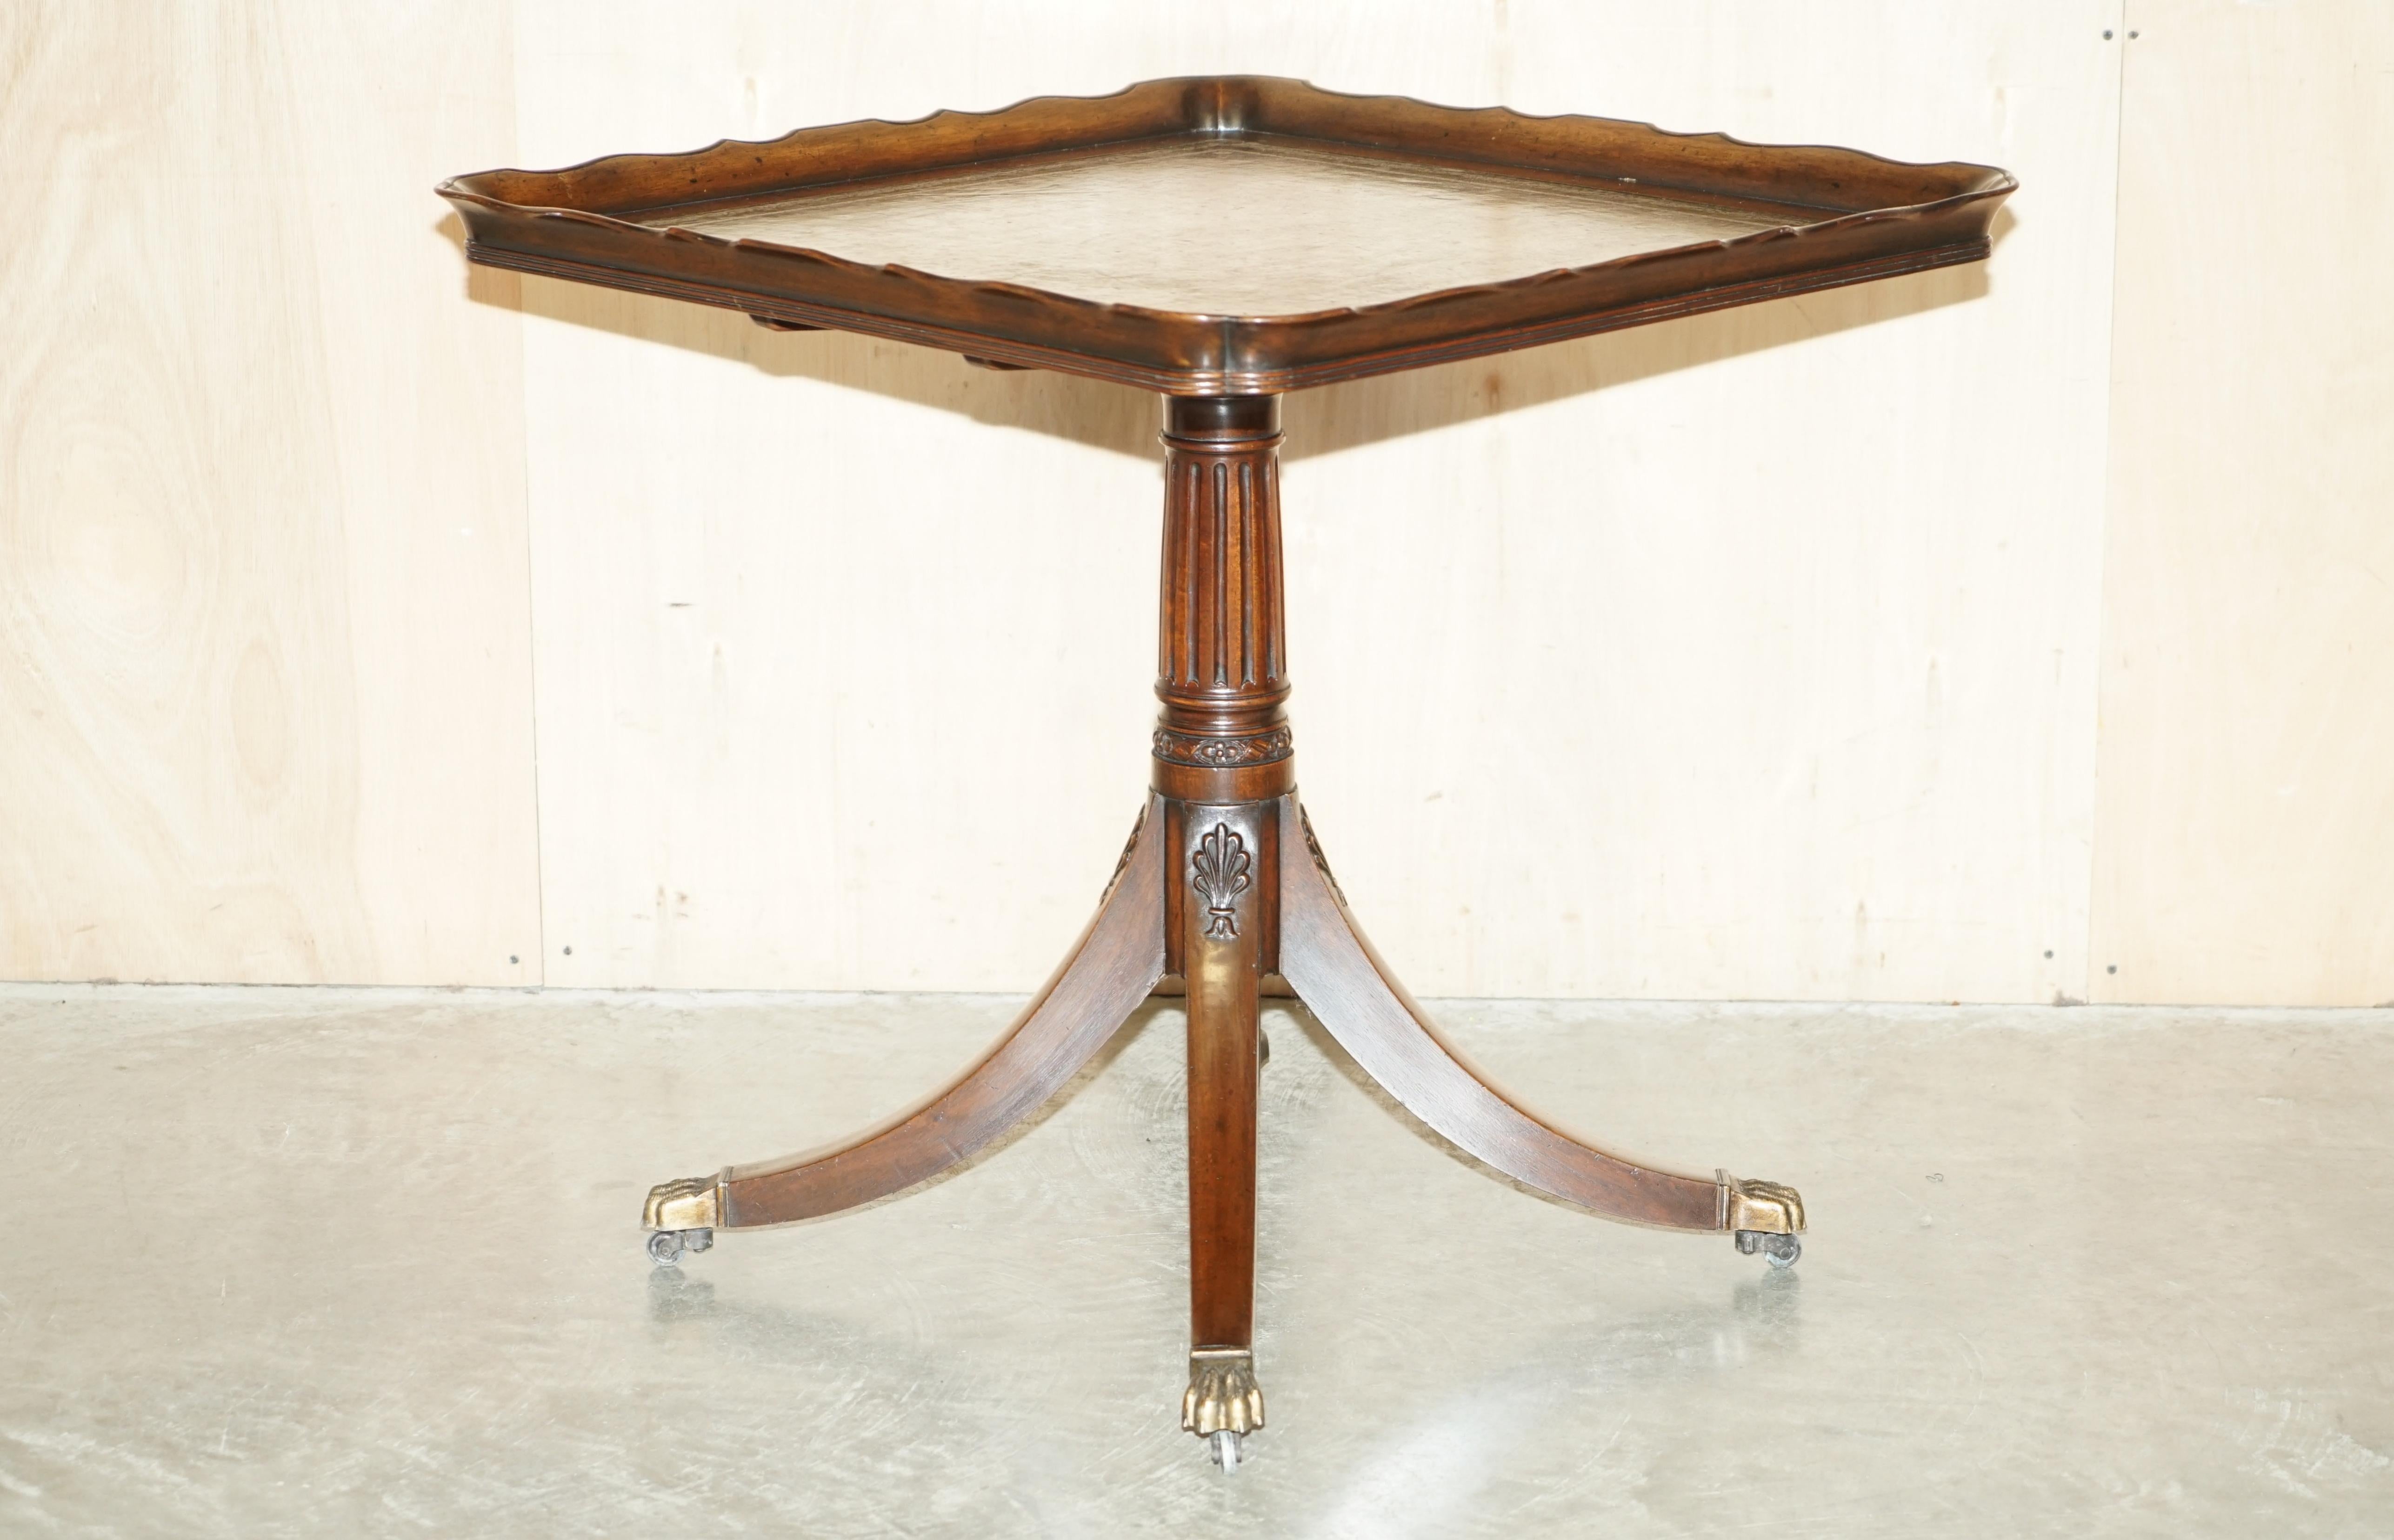 We are delighted to offer for sale this stunning original Victorian hand made in England Mahogany & green Leather tilt top occasional centre table

A good looking and well made table, in truth I have never seen another like it, the edge of the